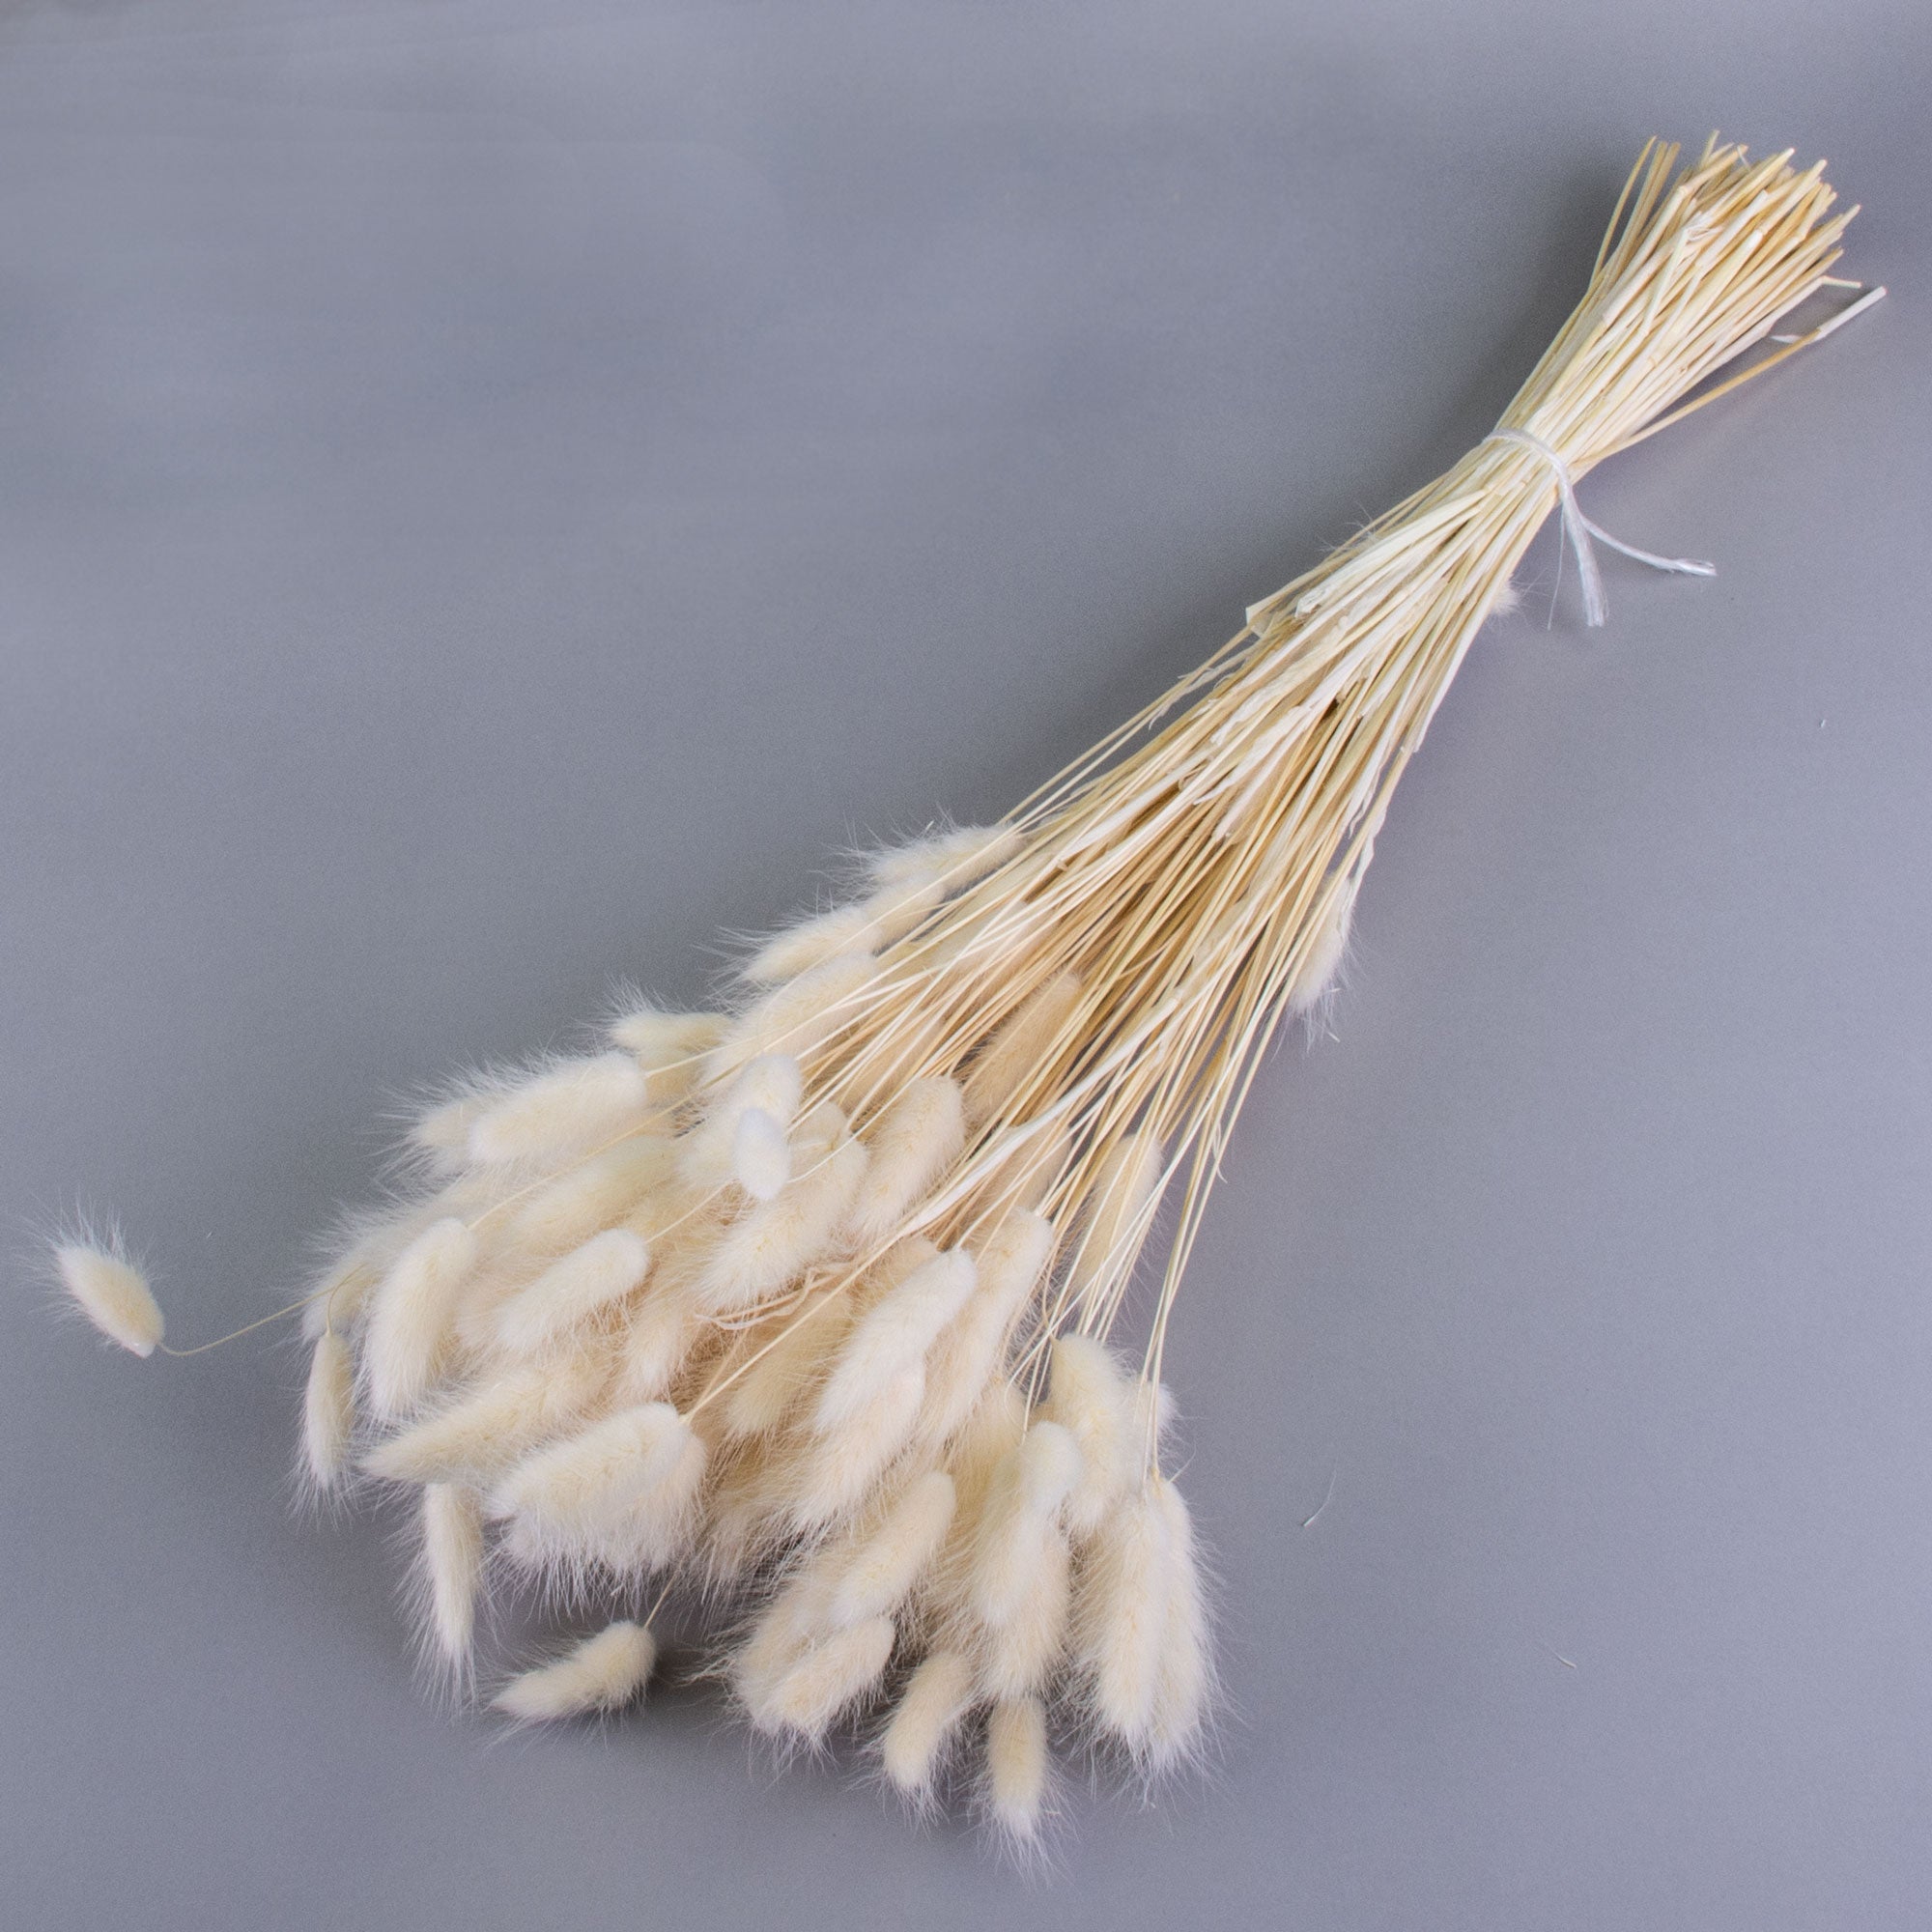 This image shows a bunch of bleached white lagurus ovatus, against a light grey background